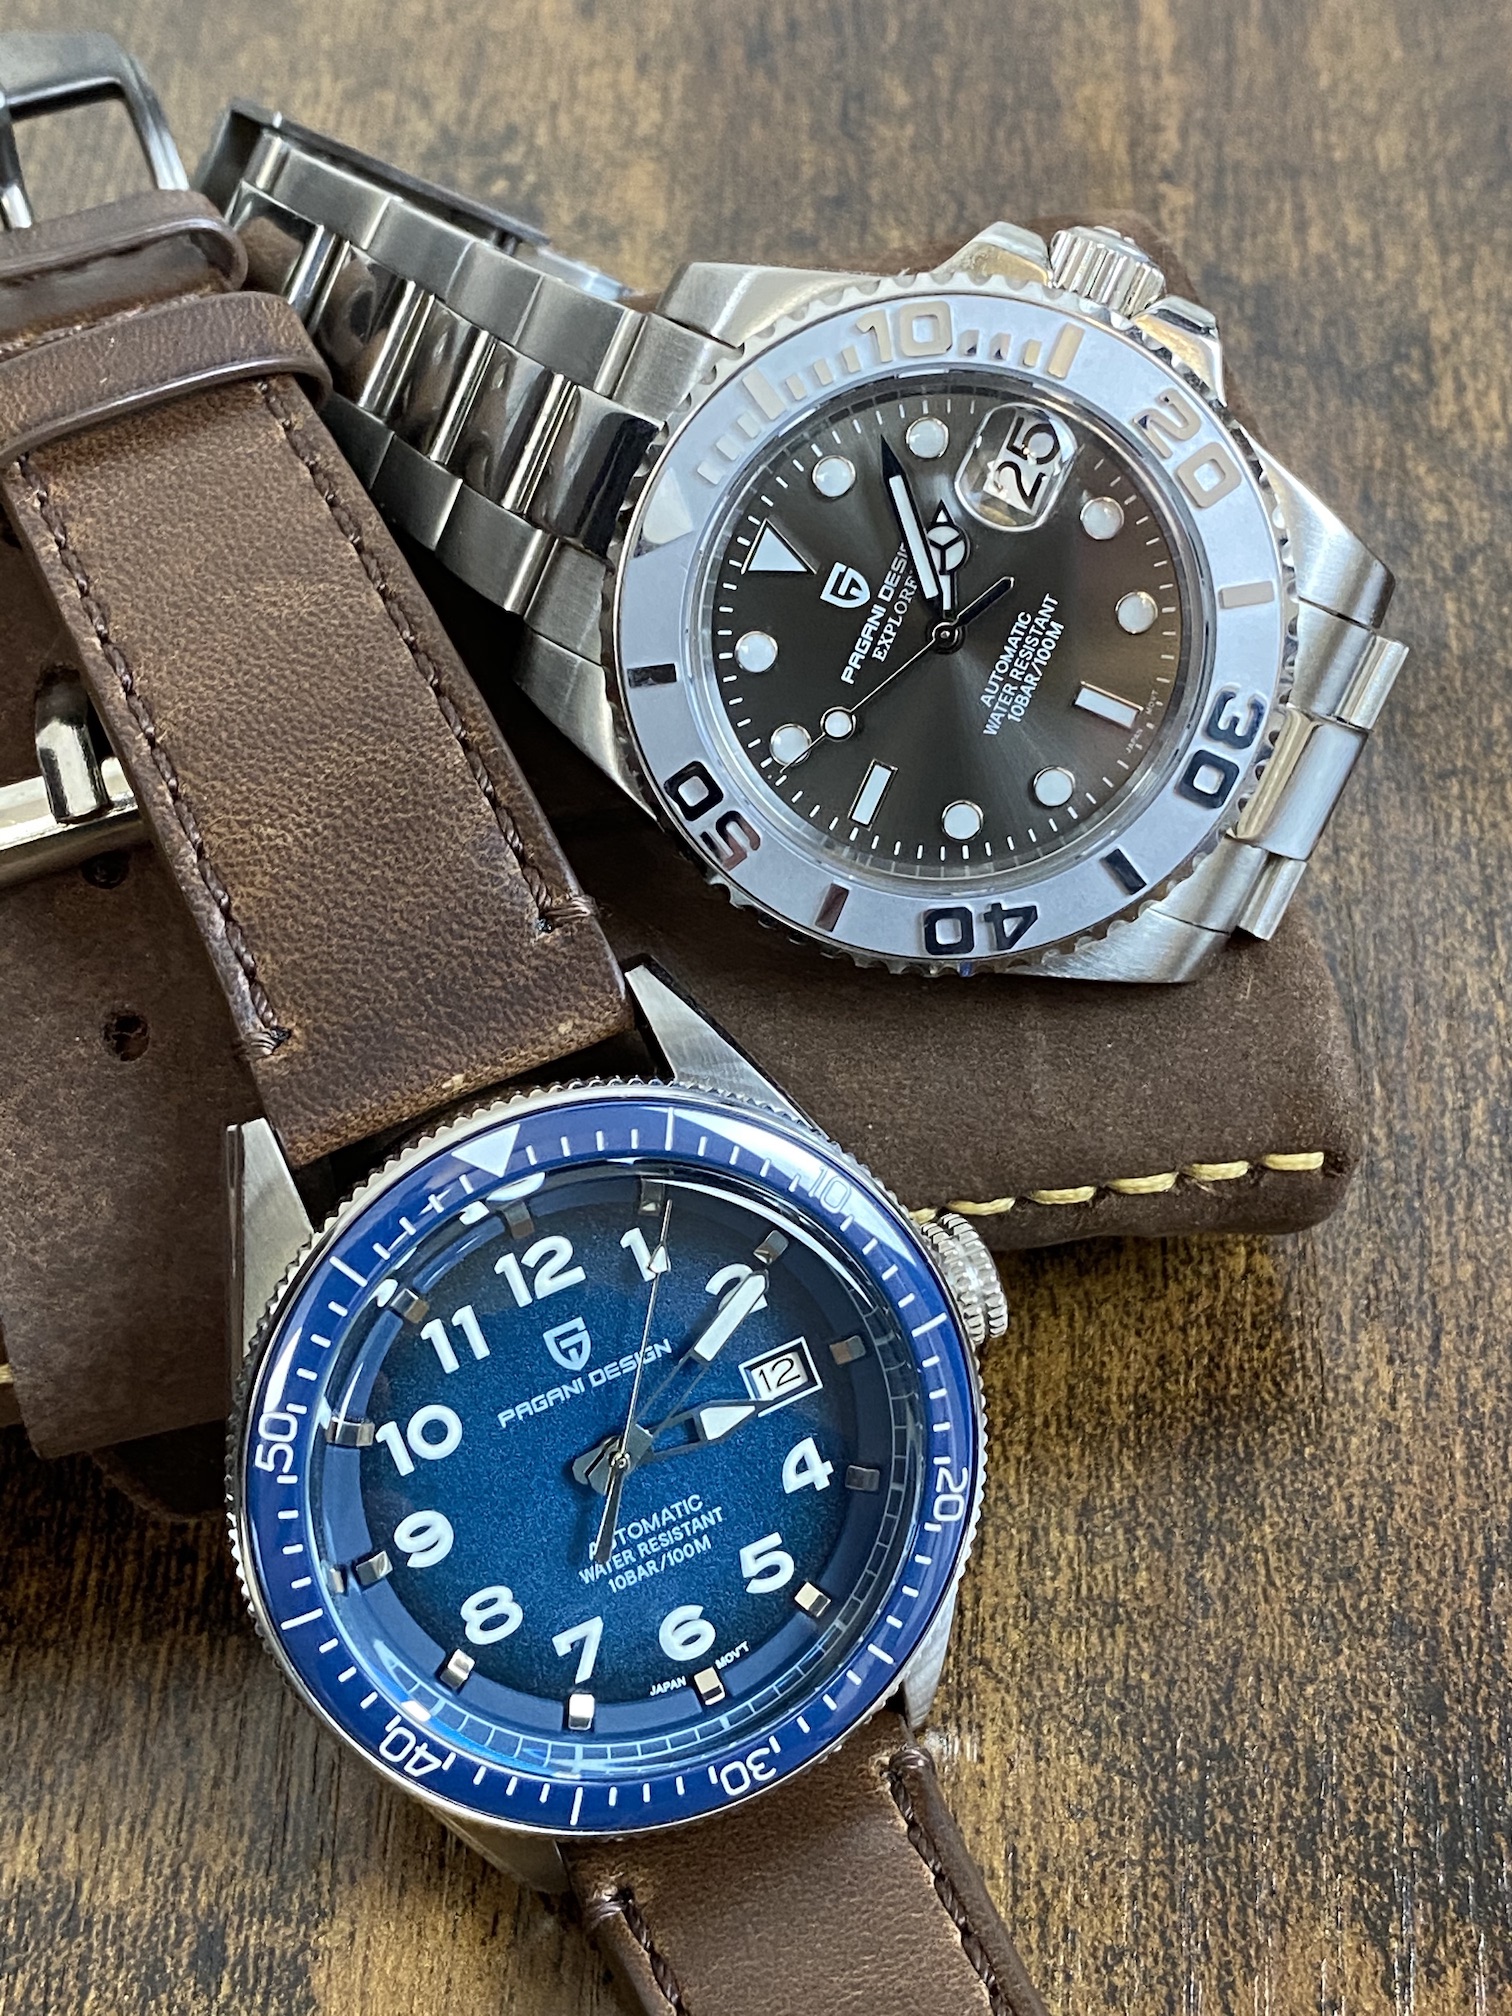 i've been seeing lots of these “seiko mods” on ebay etsy and instagram etc  they're basically homage watches with a seiko movement in them and a seiko  logo. what are your opinions